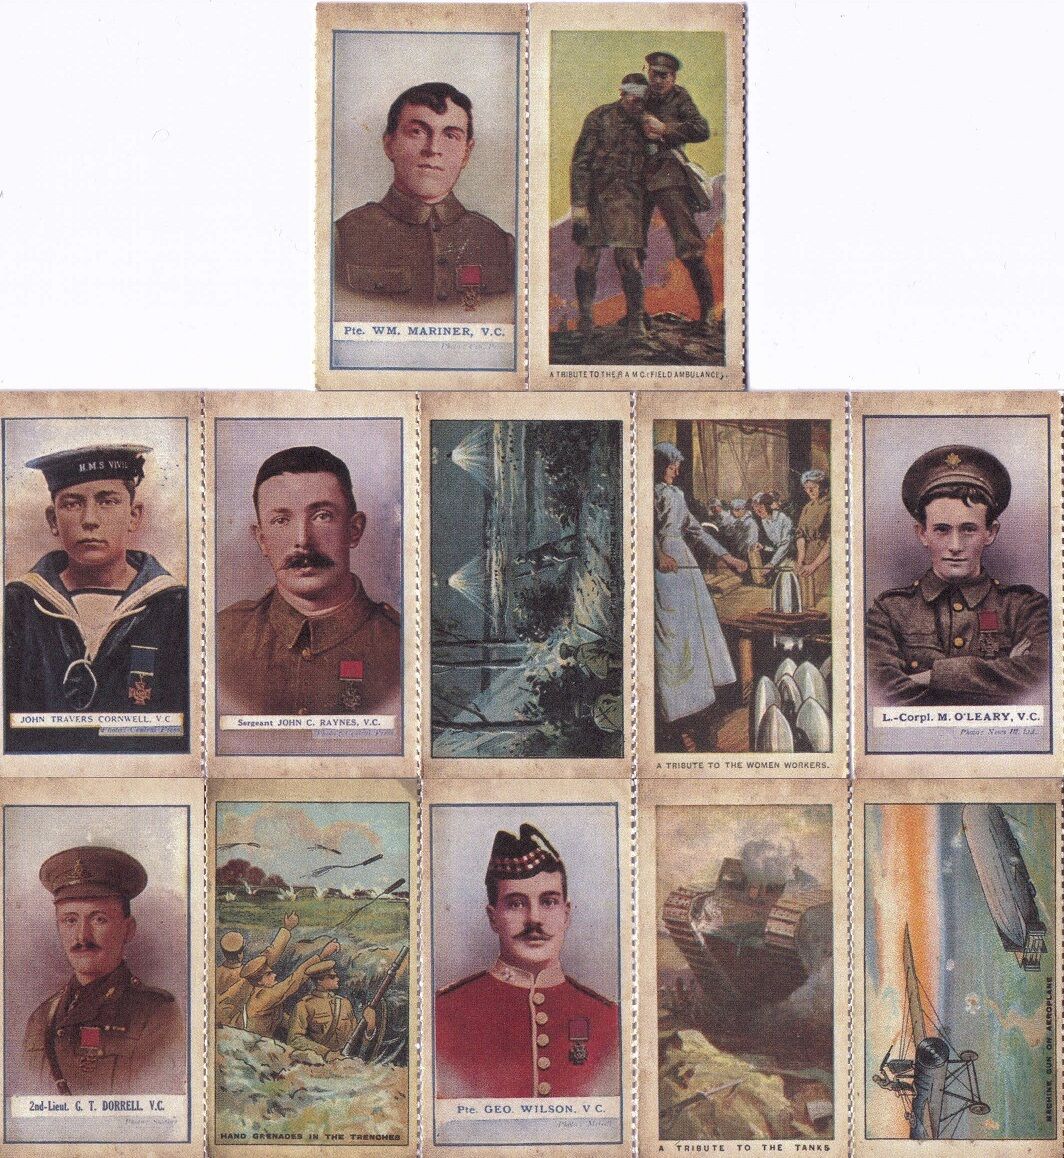 12 World War I Cigarette Cards / Trade Cards Soldiers War Images The Great War